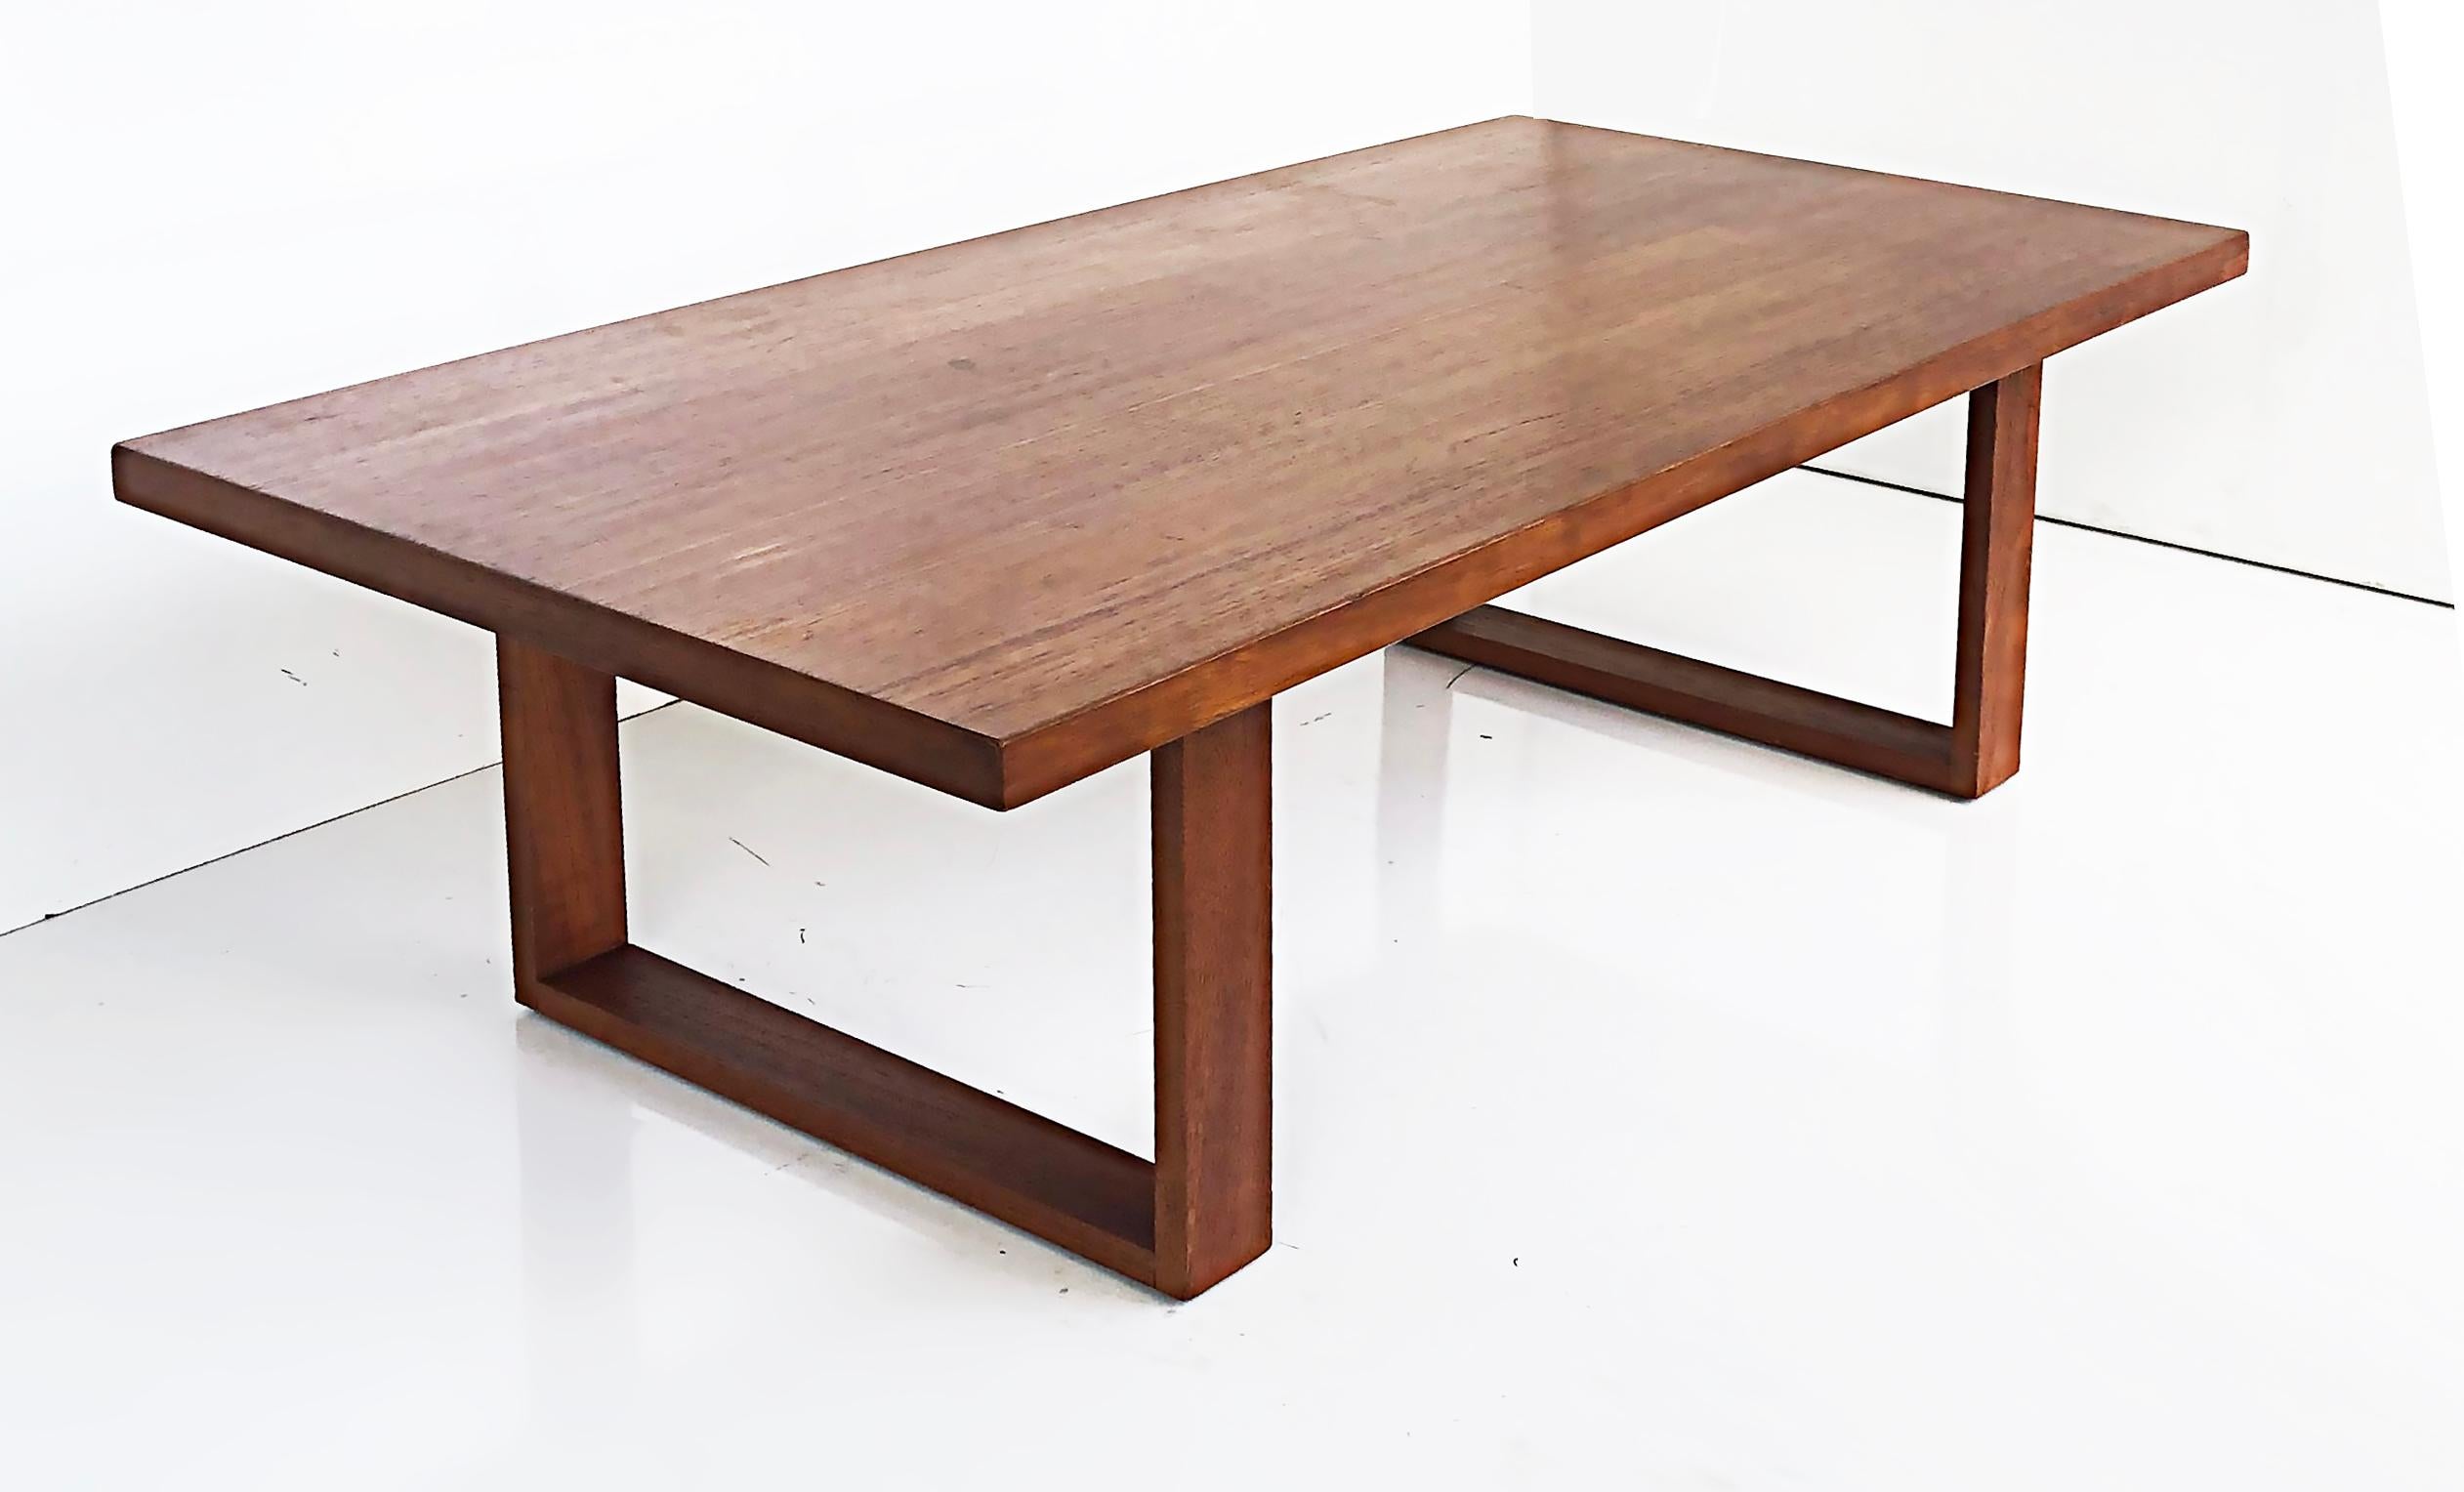 Teak Danish Modern Poul Cadovius for CADO Coffee Table

Offered for sale is a Mid-century Scandinavian Danish Modern teak coffee table by Poul Cadovius for CADO of Denmark. The table has very clean lines and retains the original metal maker's tag